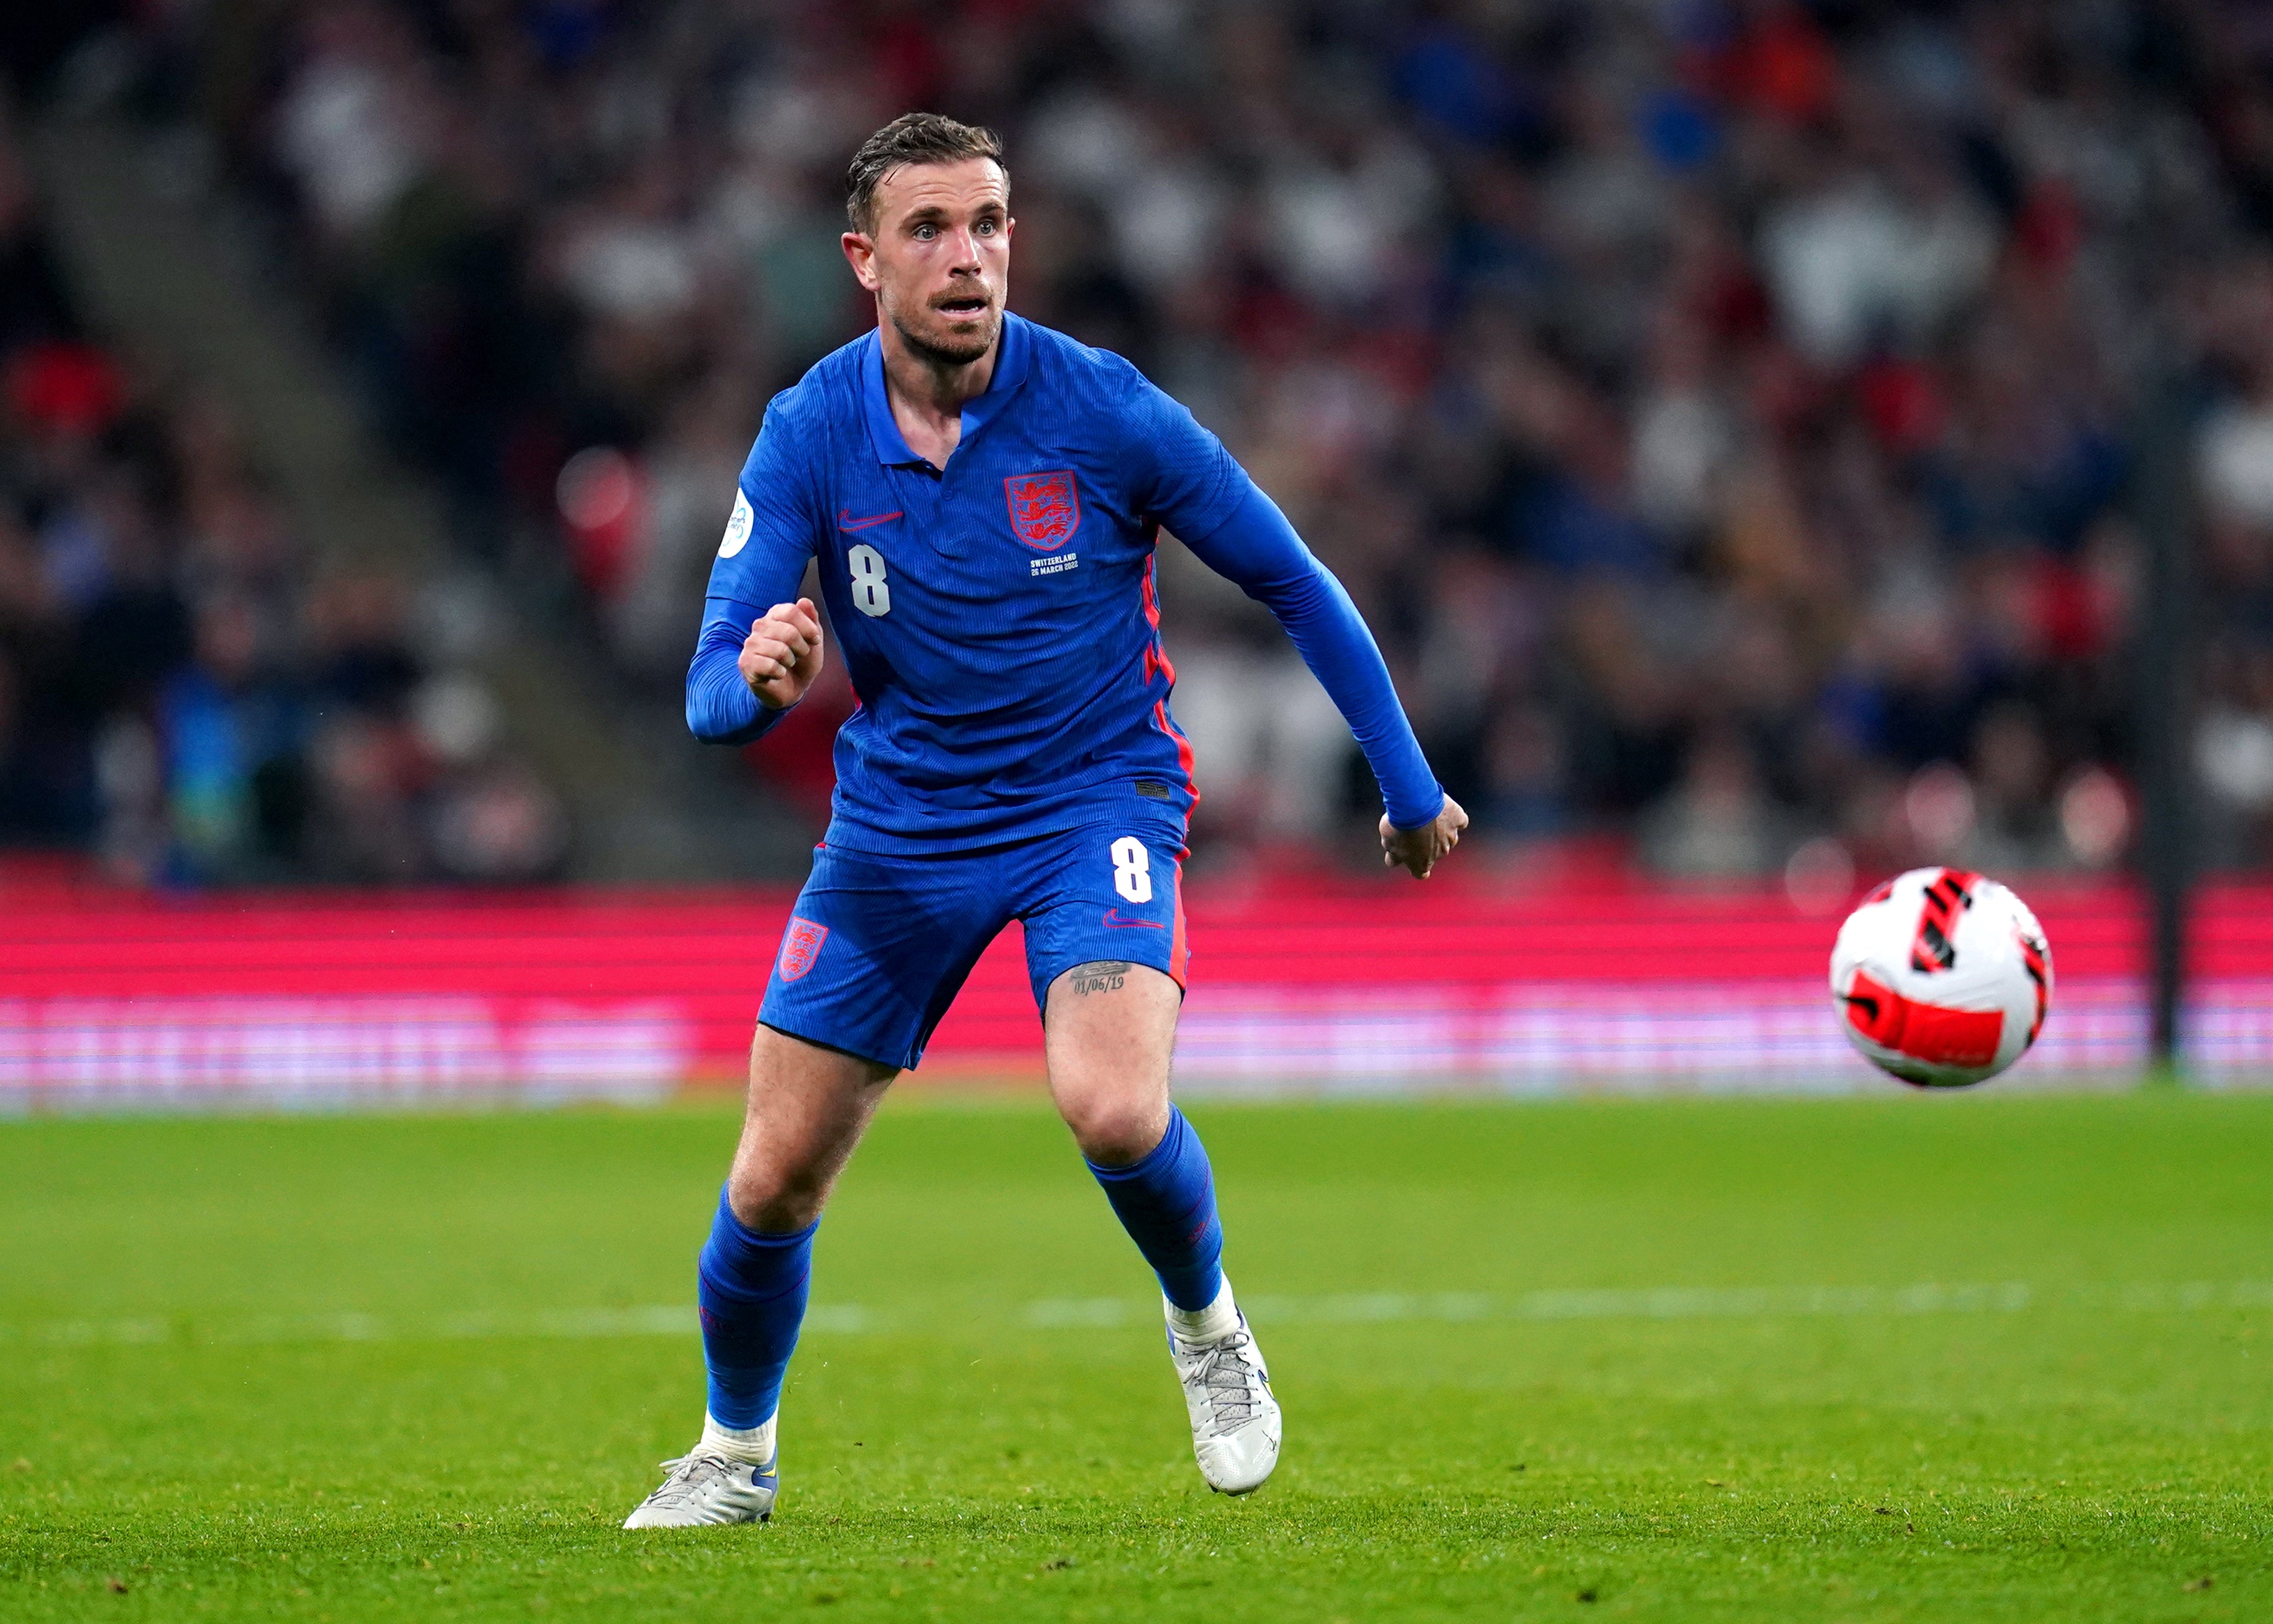 Jordan Henderson was rested from England duty next month, but Ian Baraclough says that is a luxury smaller nations like Northern Ireland do not have (Nick Potts/PA)